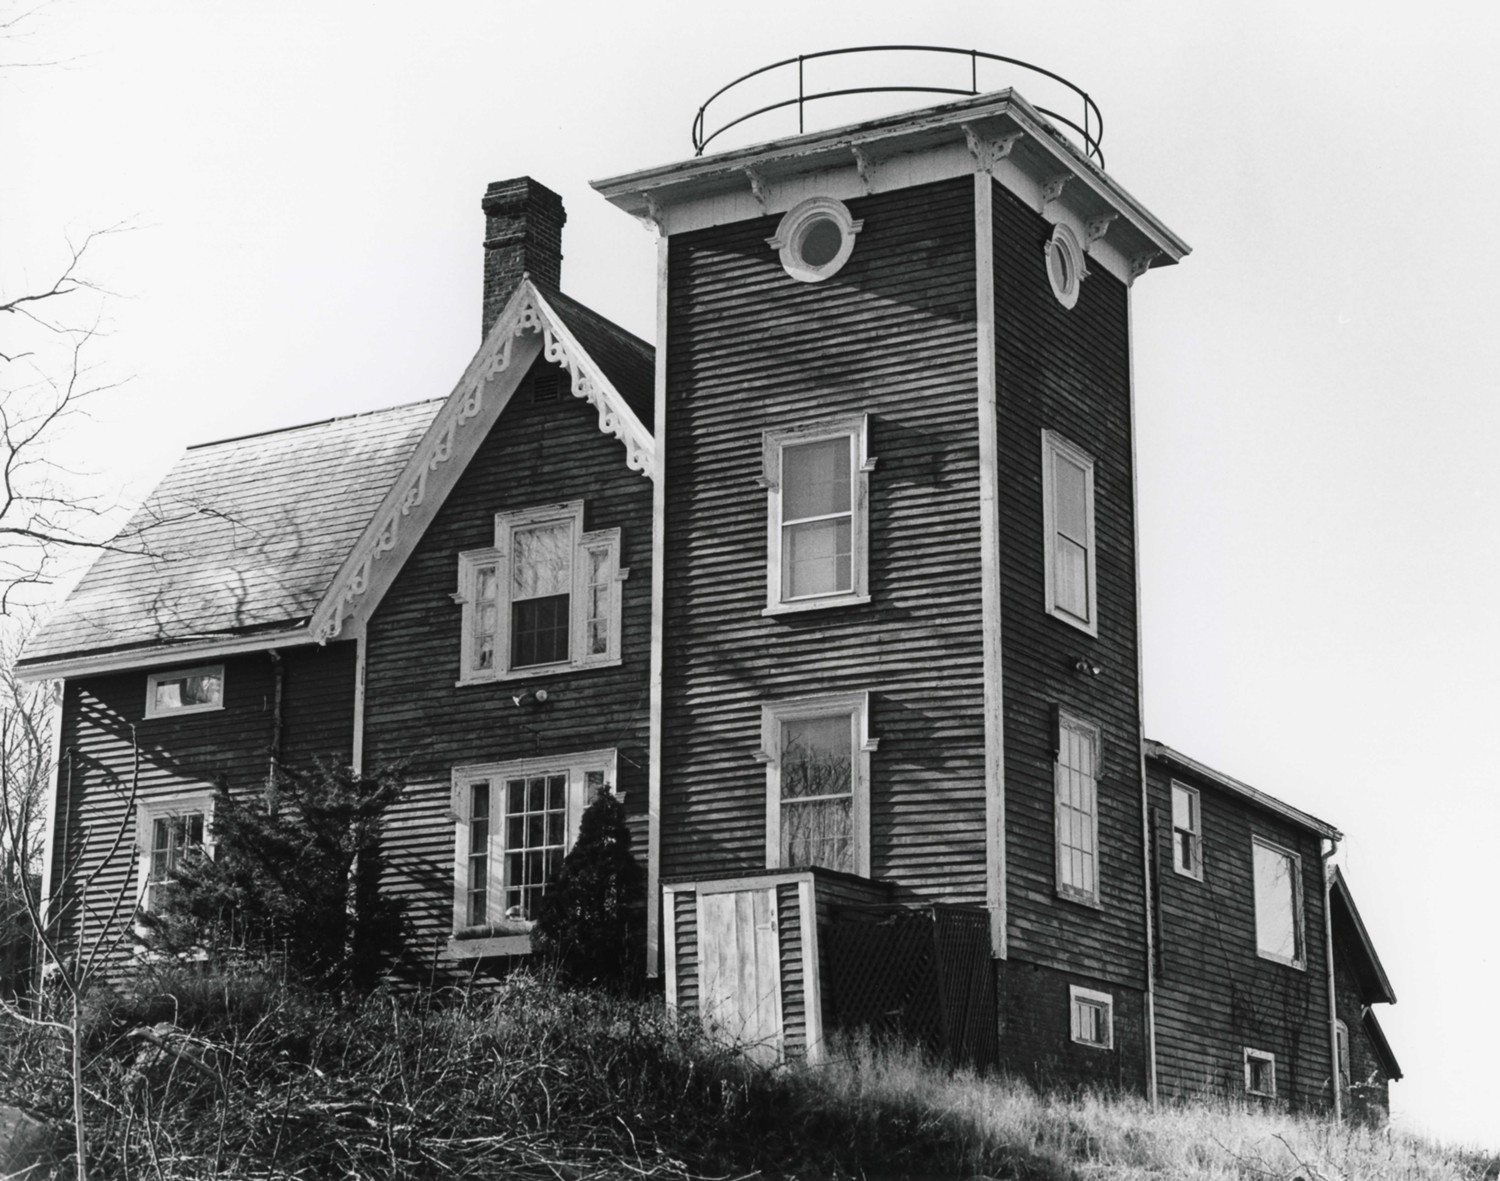 Conanicut Island Lighthouse, Jamestown Rhode Island Light and keeper's dwelling, north and east sides (1984)